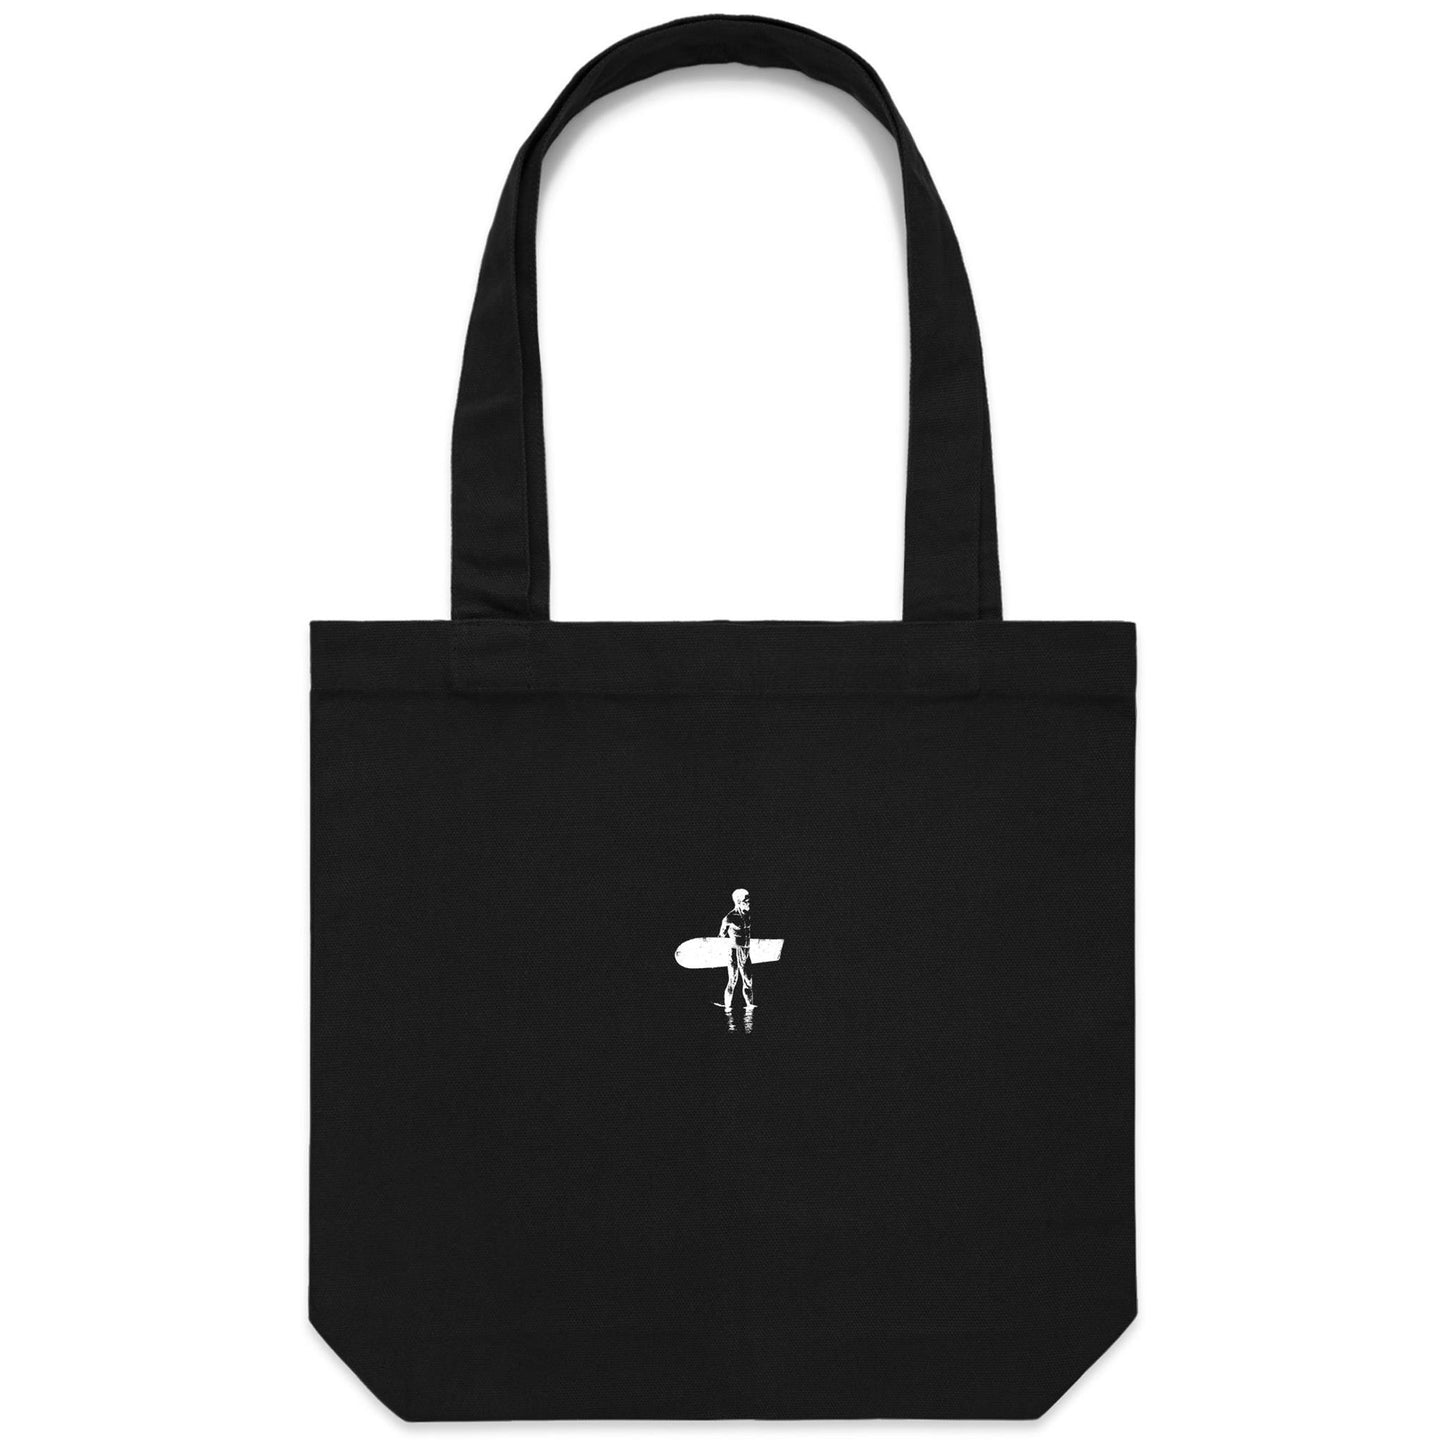 Finless is More Canvas Totes